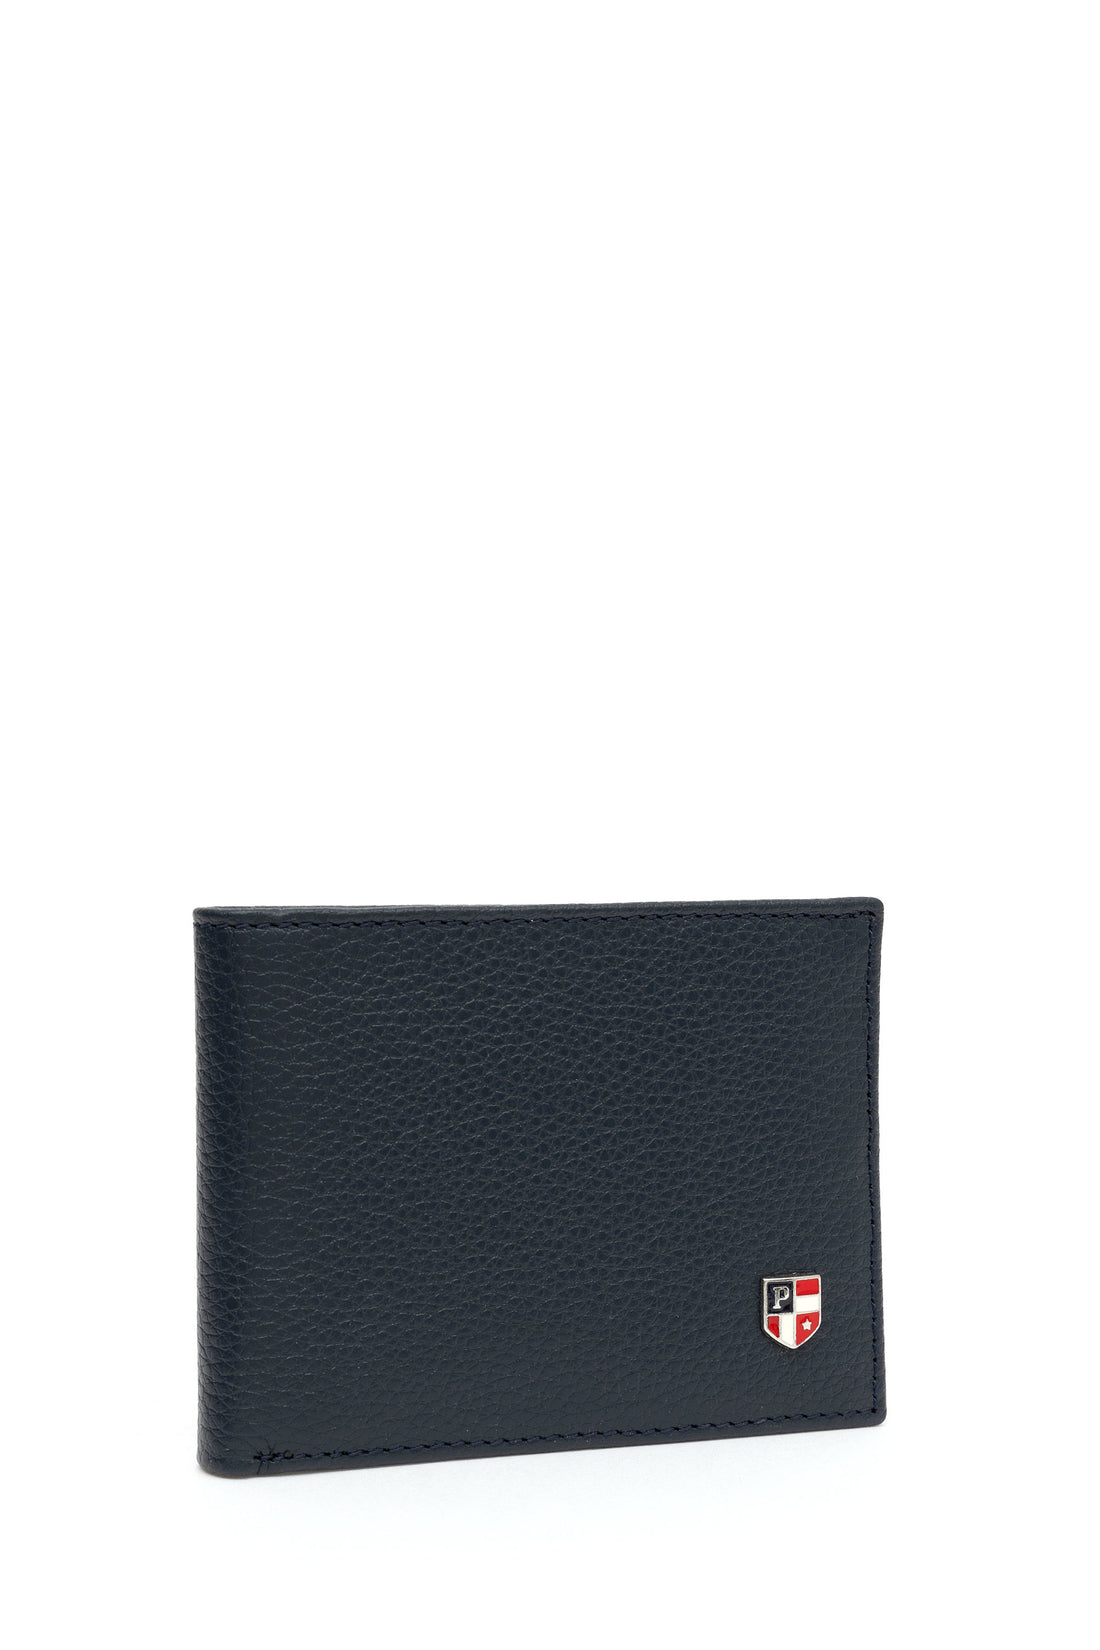 Navy Blue Wallet With Logo_A081SZ0CD0 1876410_VR033_02